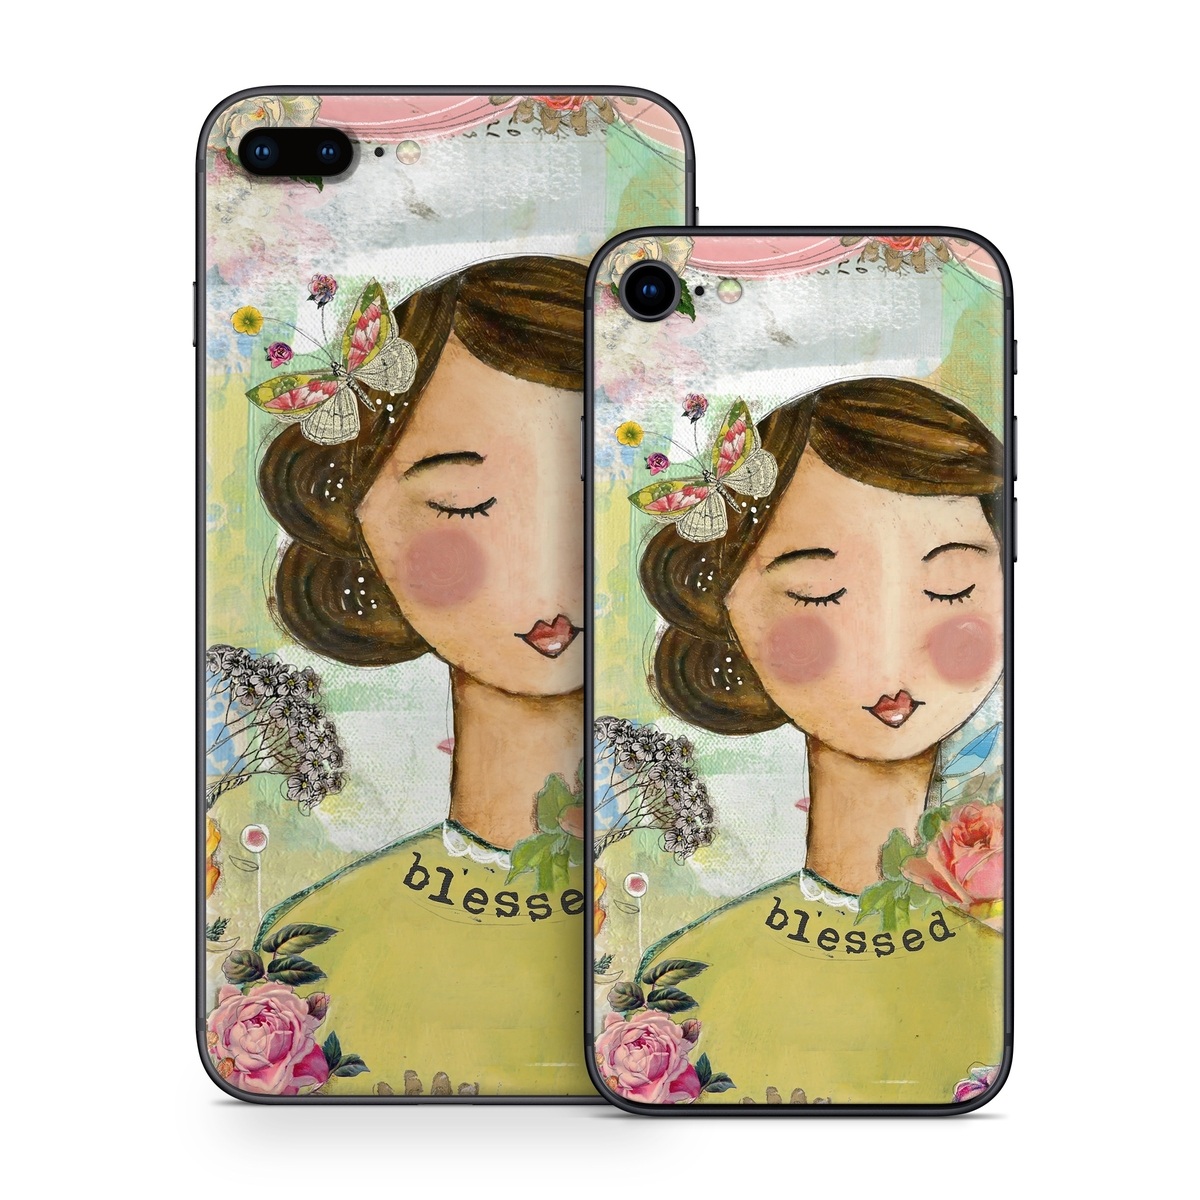 iPhone 8 Series Skin design of Illustration, Cheek, Art, Watercolor paint, Retro style, Painting, Plant, Flower, Fashion illustration, Fictional character, with pink, green, yellow, white, red, blue colors